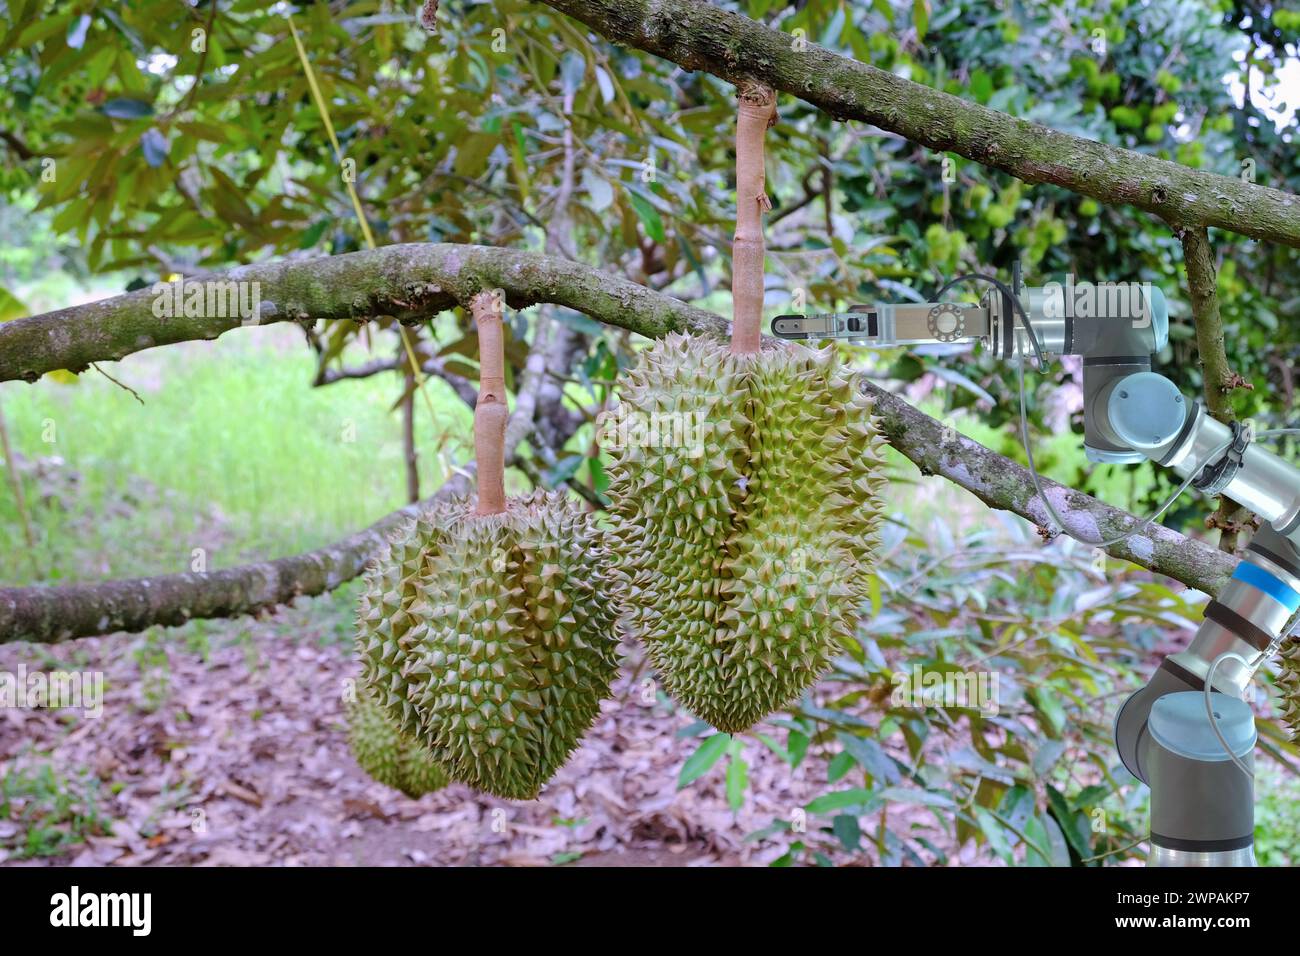 Industrial robotic that installed on Durian garden for assist gardener to work and harvest product, smart farming 4.0 concept Stock Photo